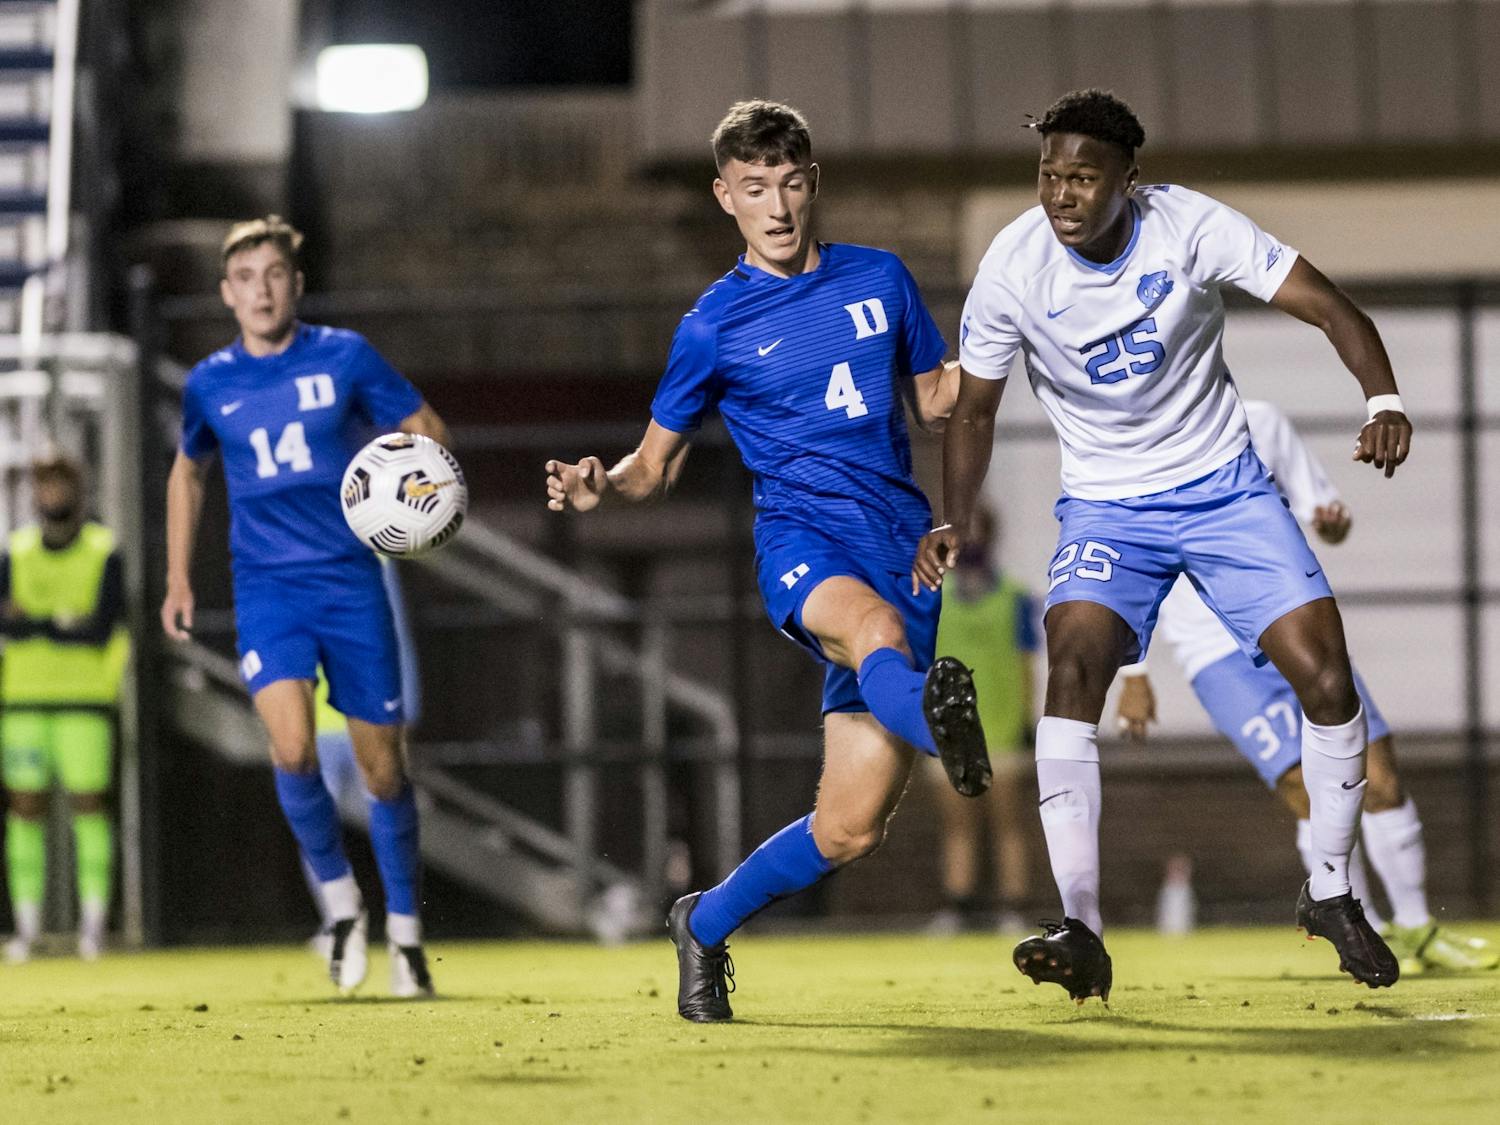 Freshman defender Lewis McGarvey has been one of the bright spots on a young Duke squad.